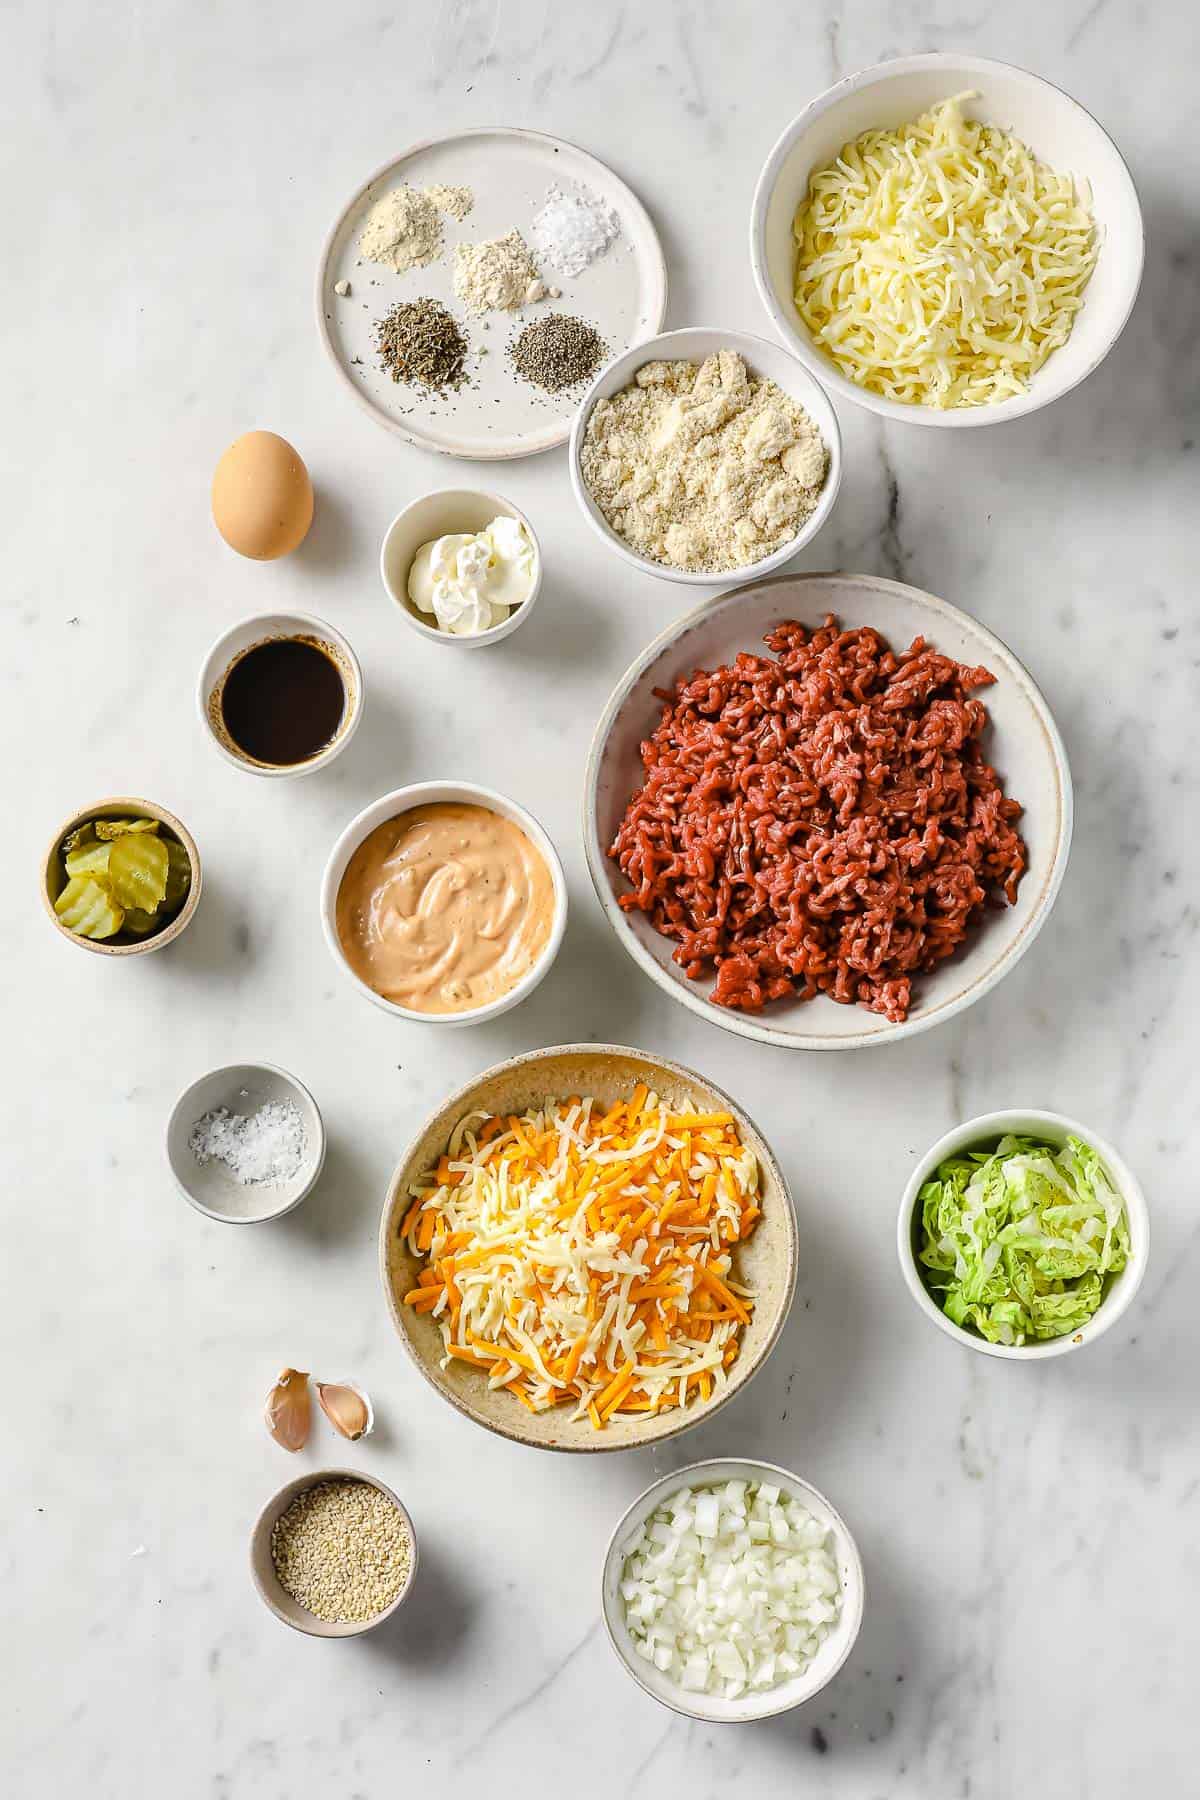 Ingredients laid out in individual bowl - ground beef, cheese, lettuce, sauce, onions, pickles, sesame seeds.